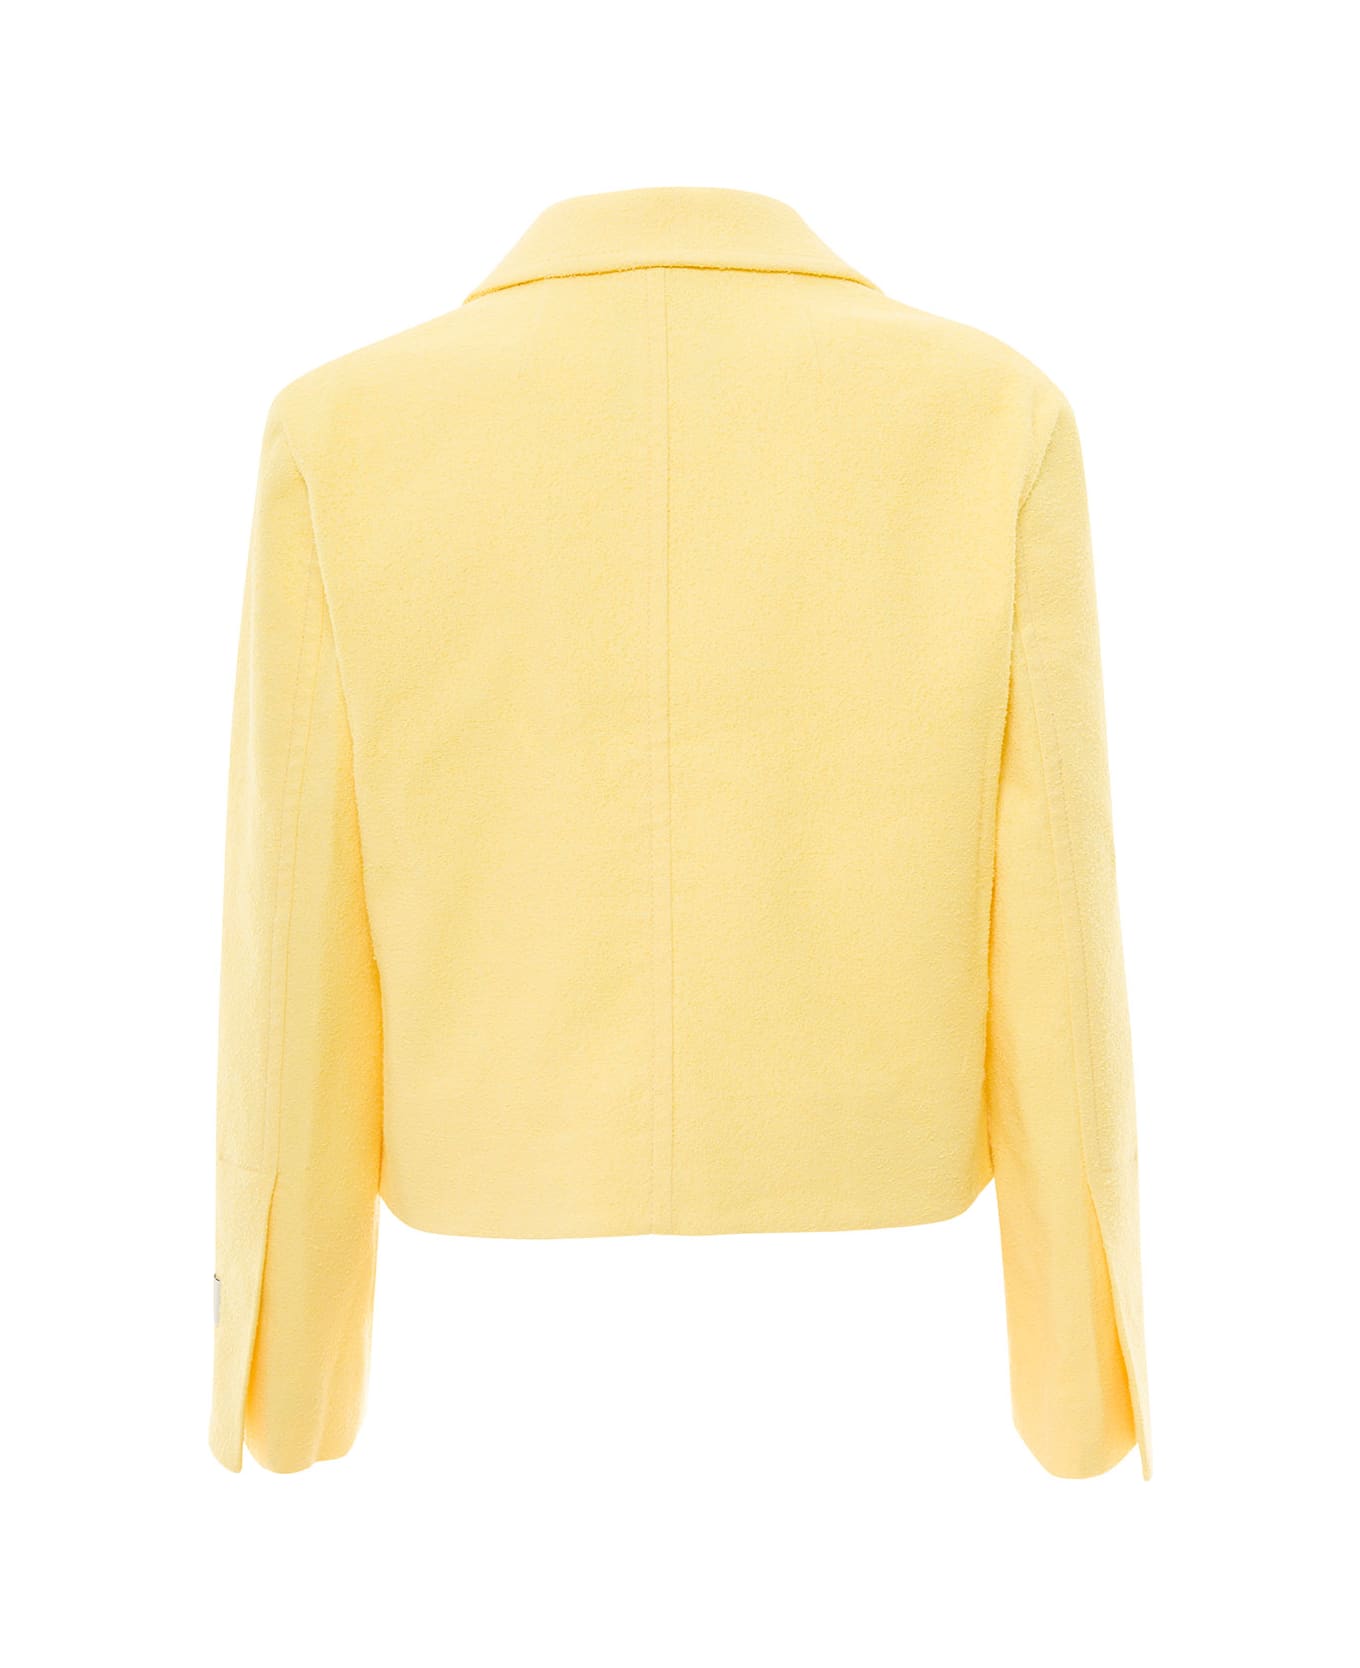 Patou Yellow Jacket With Branded Buttons In Cotton Blend Tweed Woman - Yellow